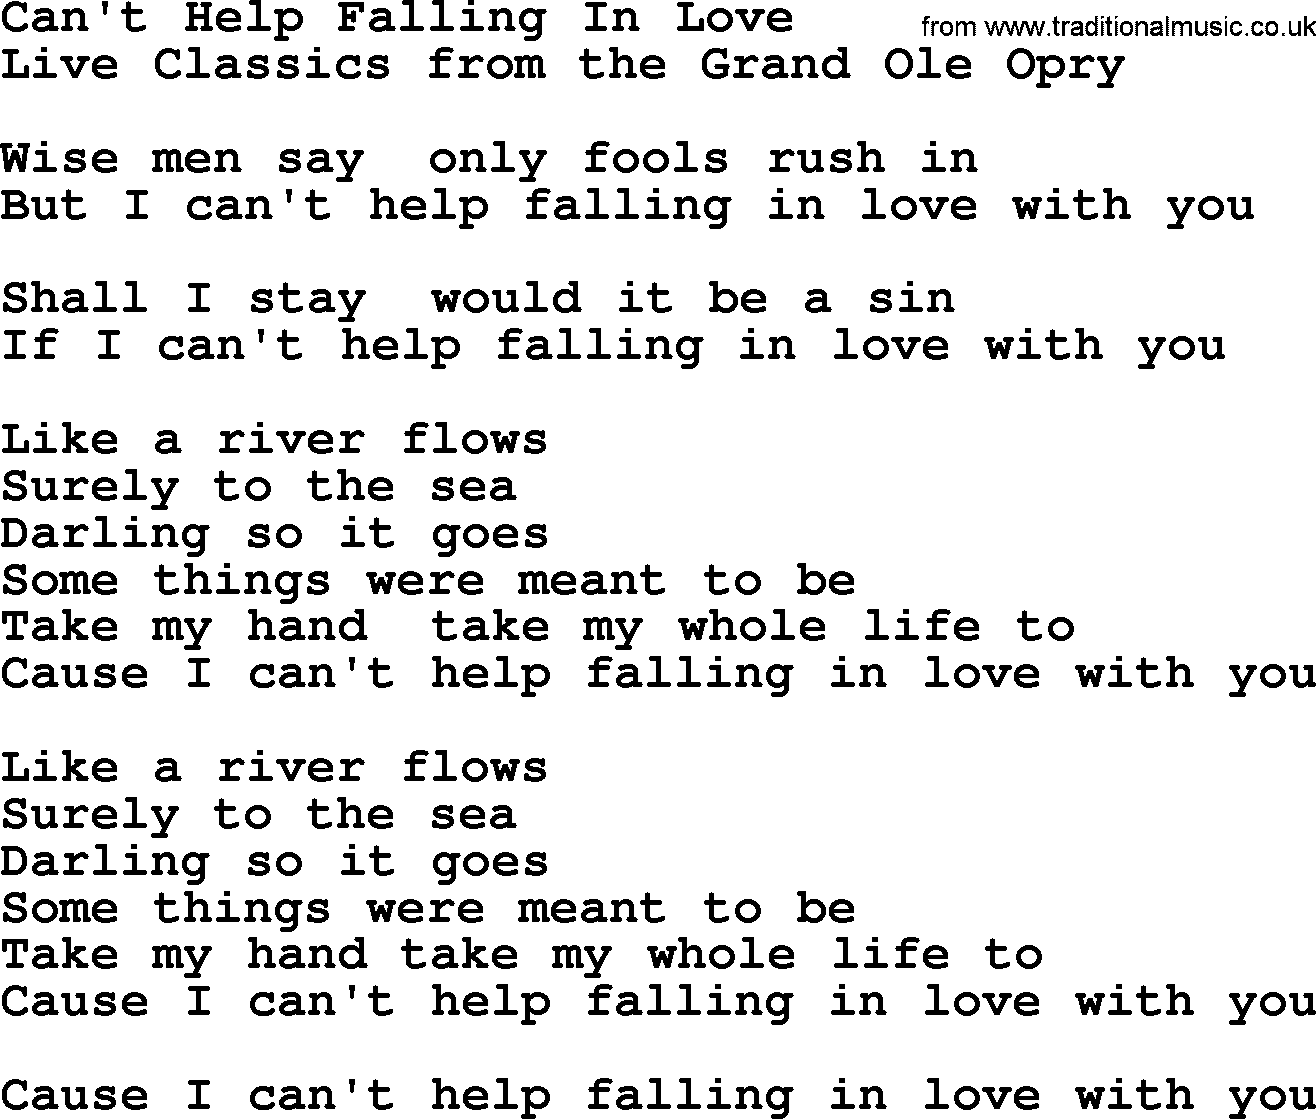 Marty Robbins song: Cant Help Falling In Love, lyrics